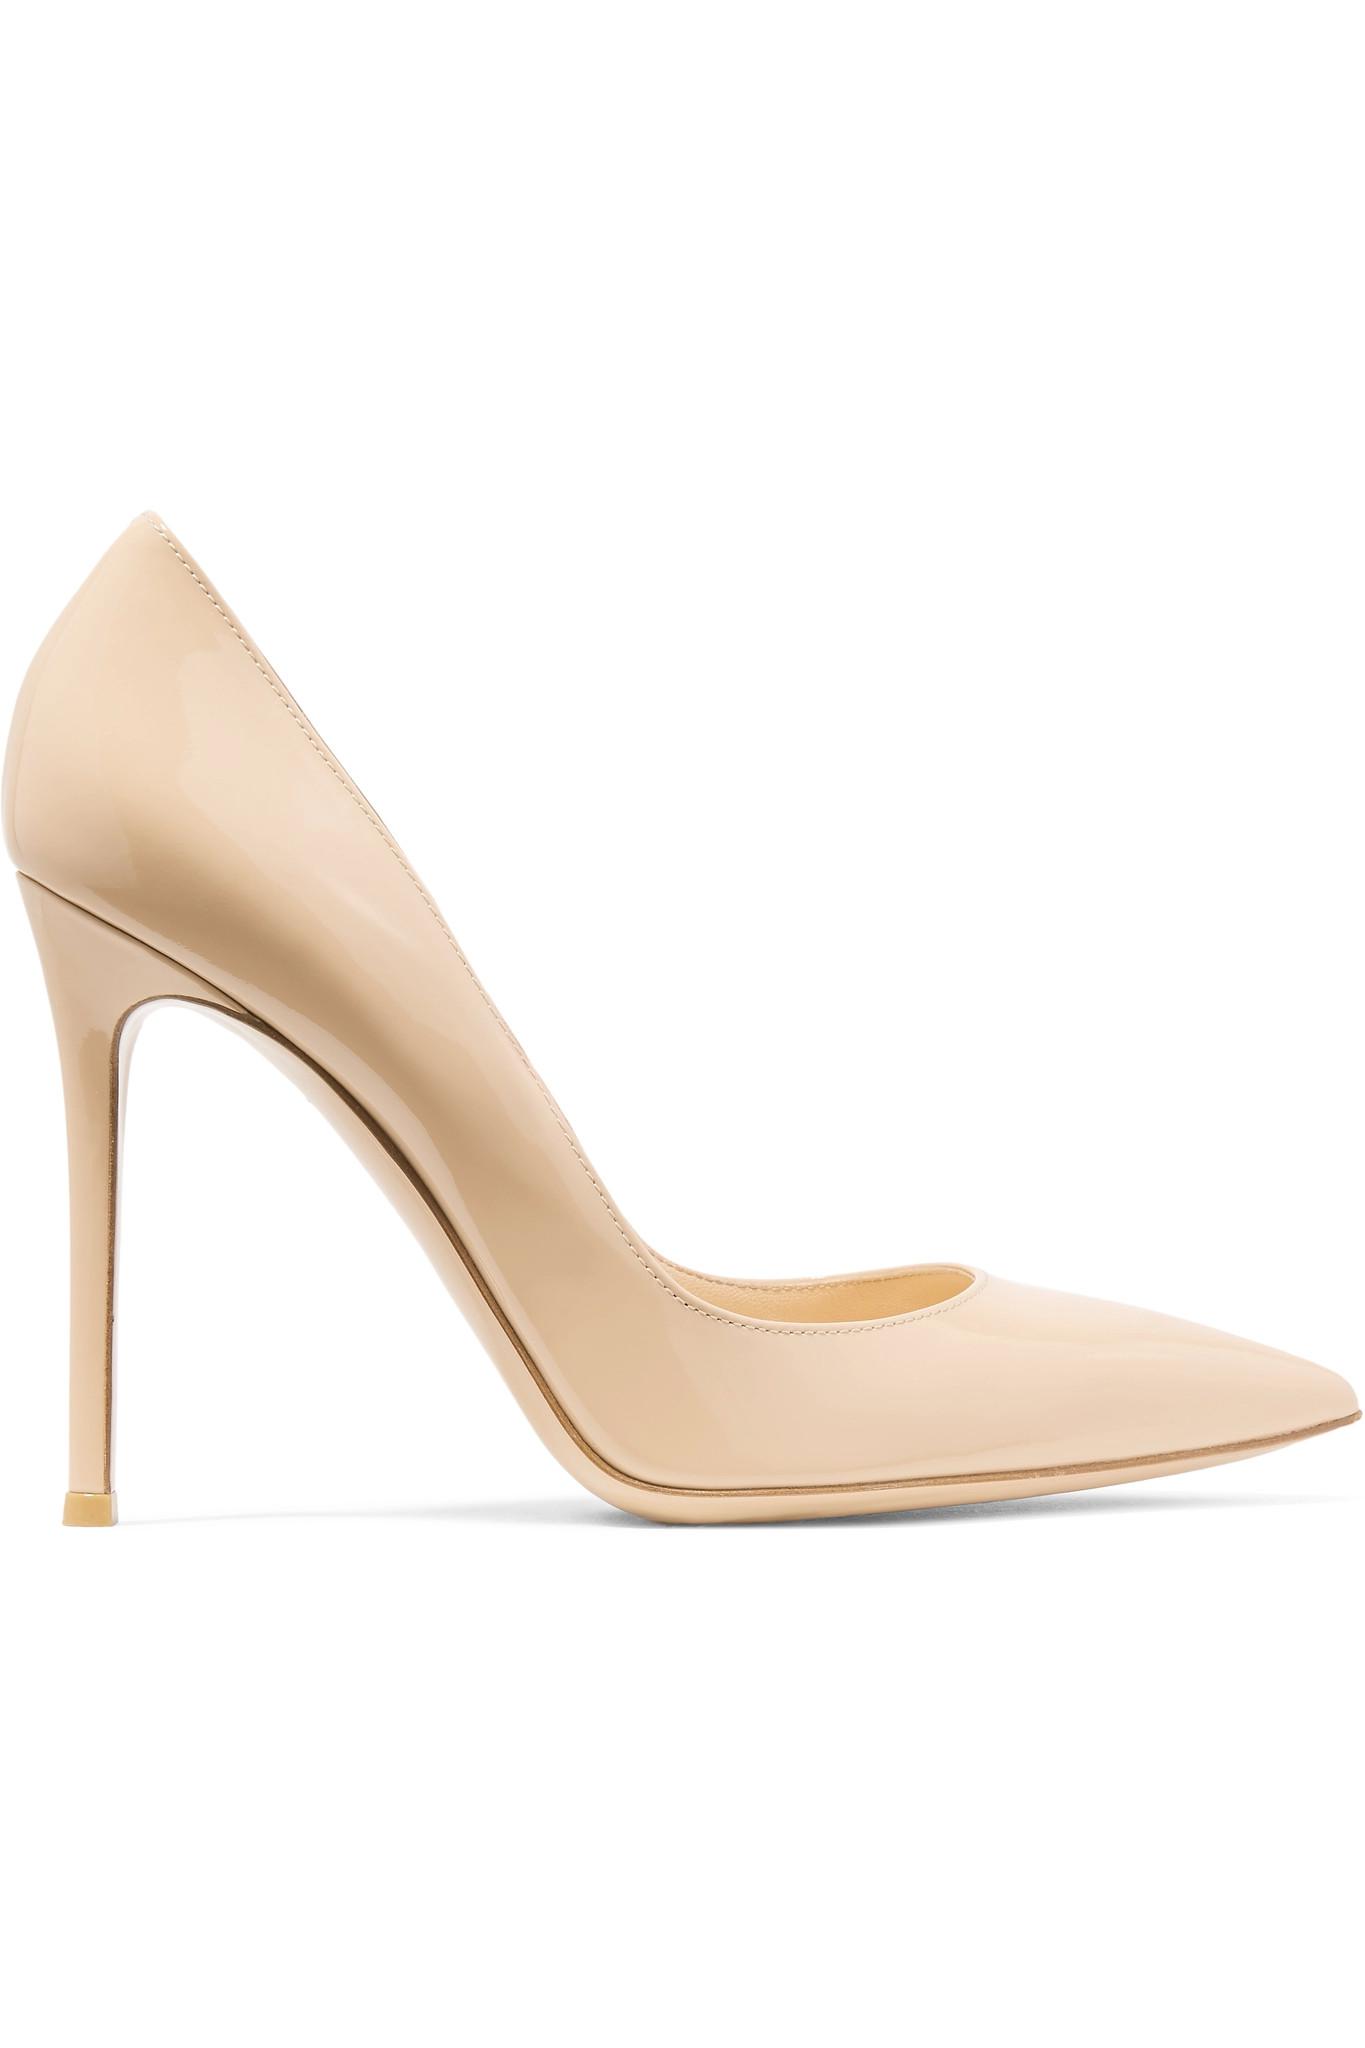 Lyst - Gianvito Rossi 105 Patent-leather Pumps in Natural